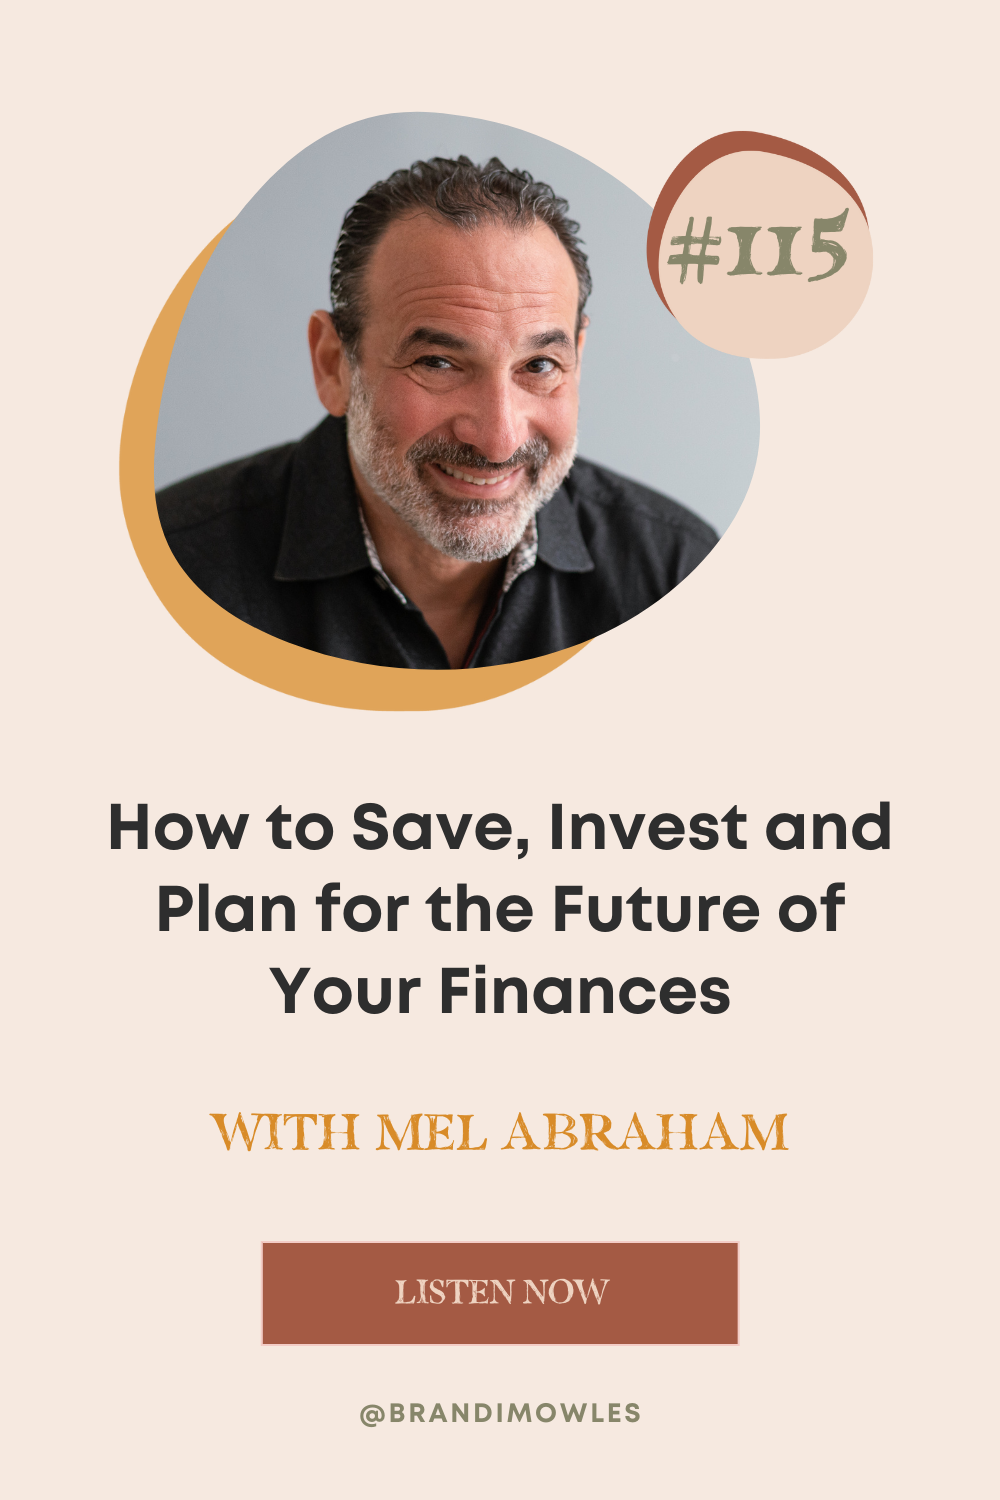 Save, Invest and Plan for the Future of Your Finances